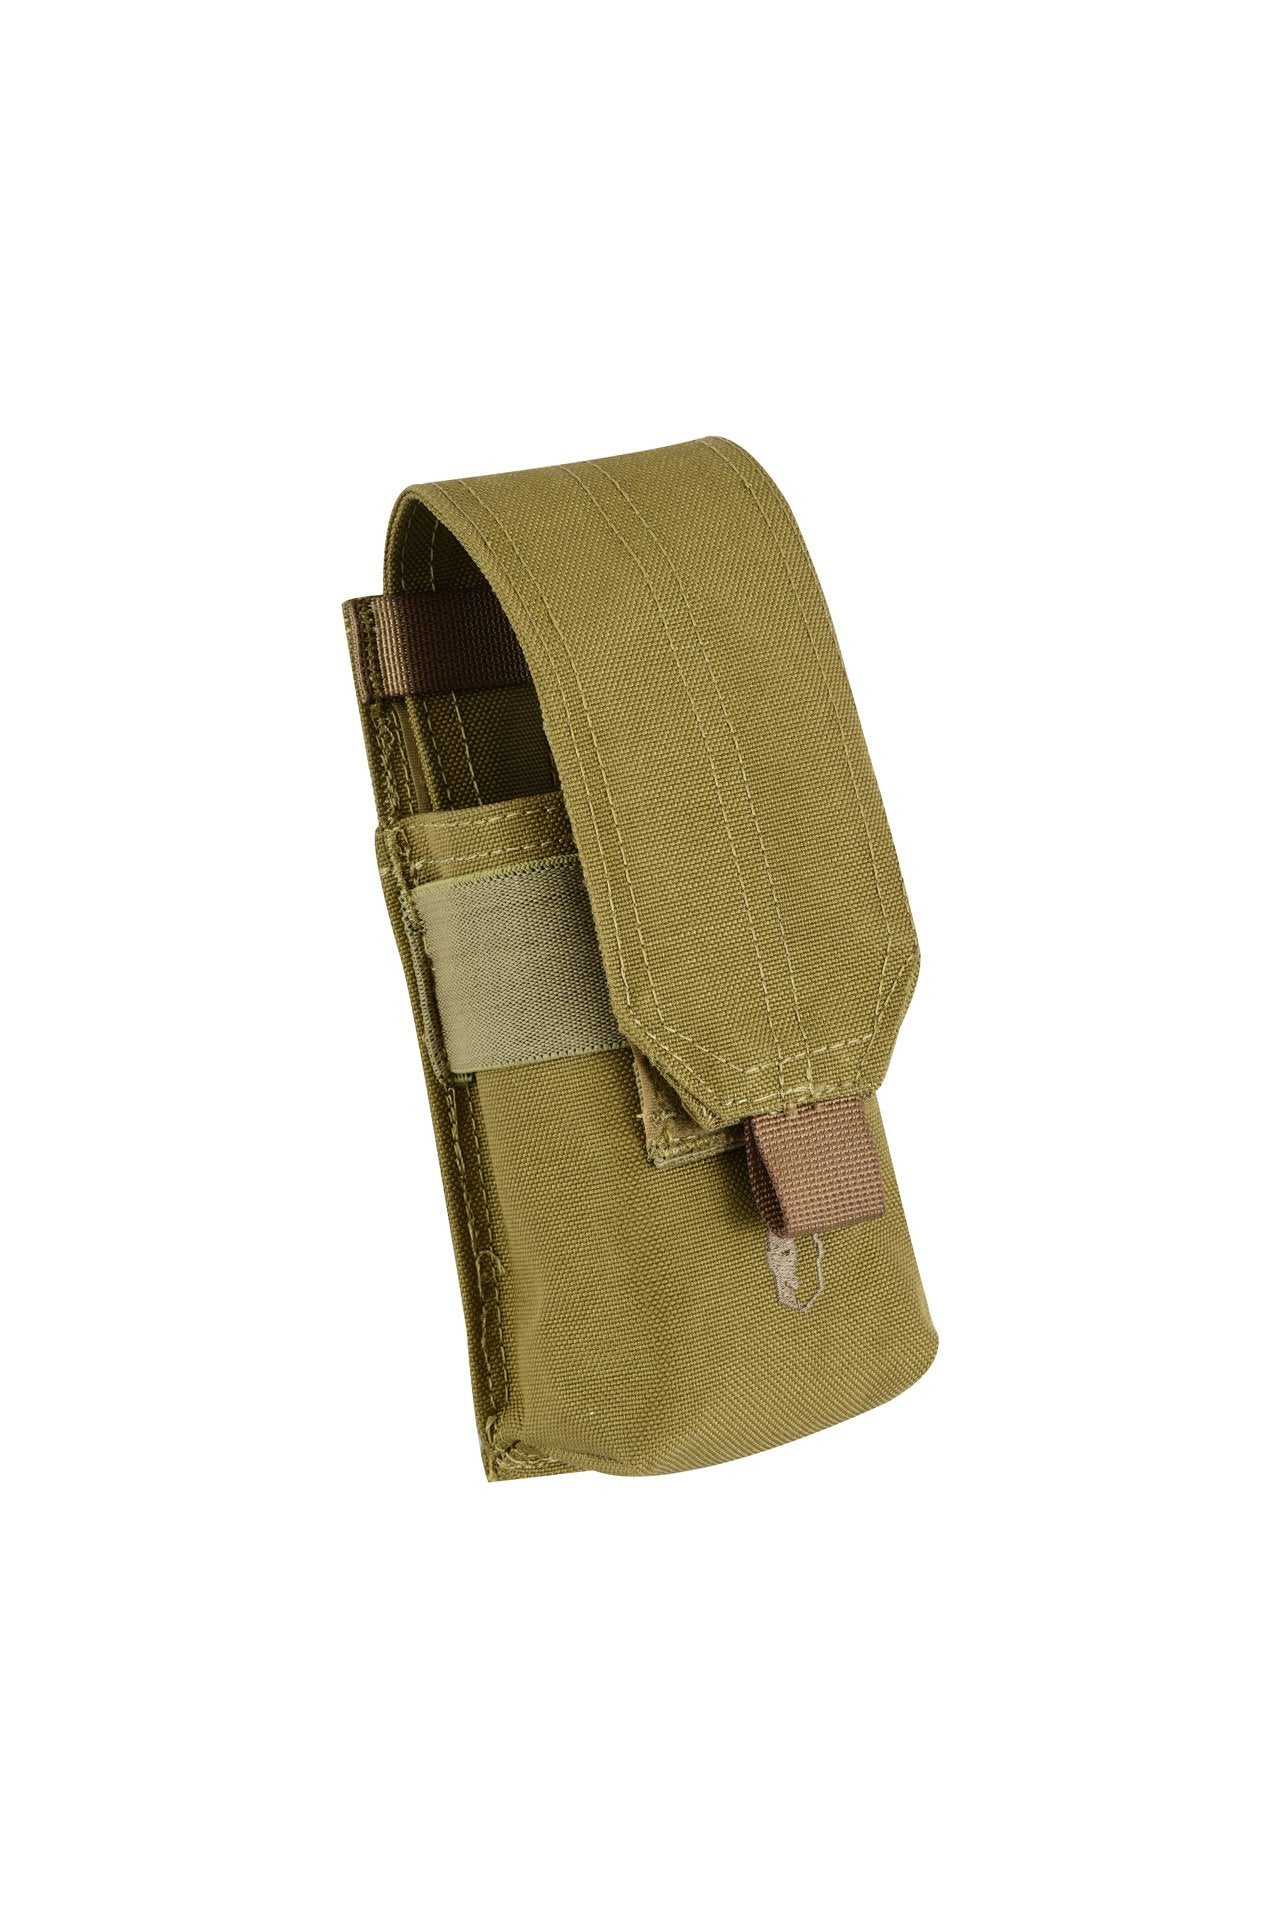 SHE-920 SINGLE M4 5.56MM MAG POUCH COLOR TAN